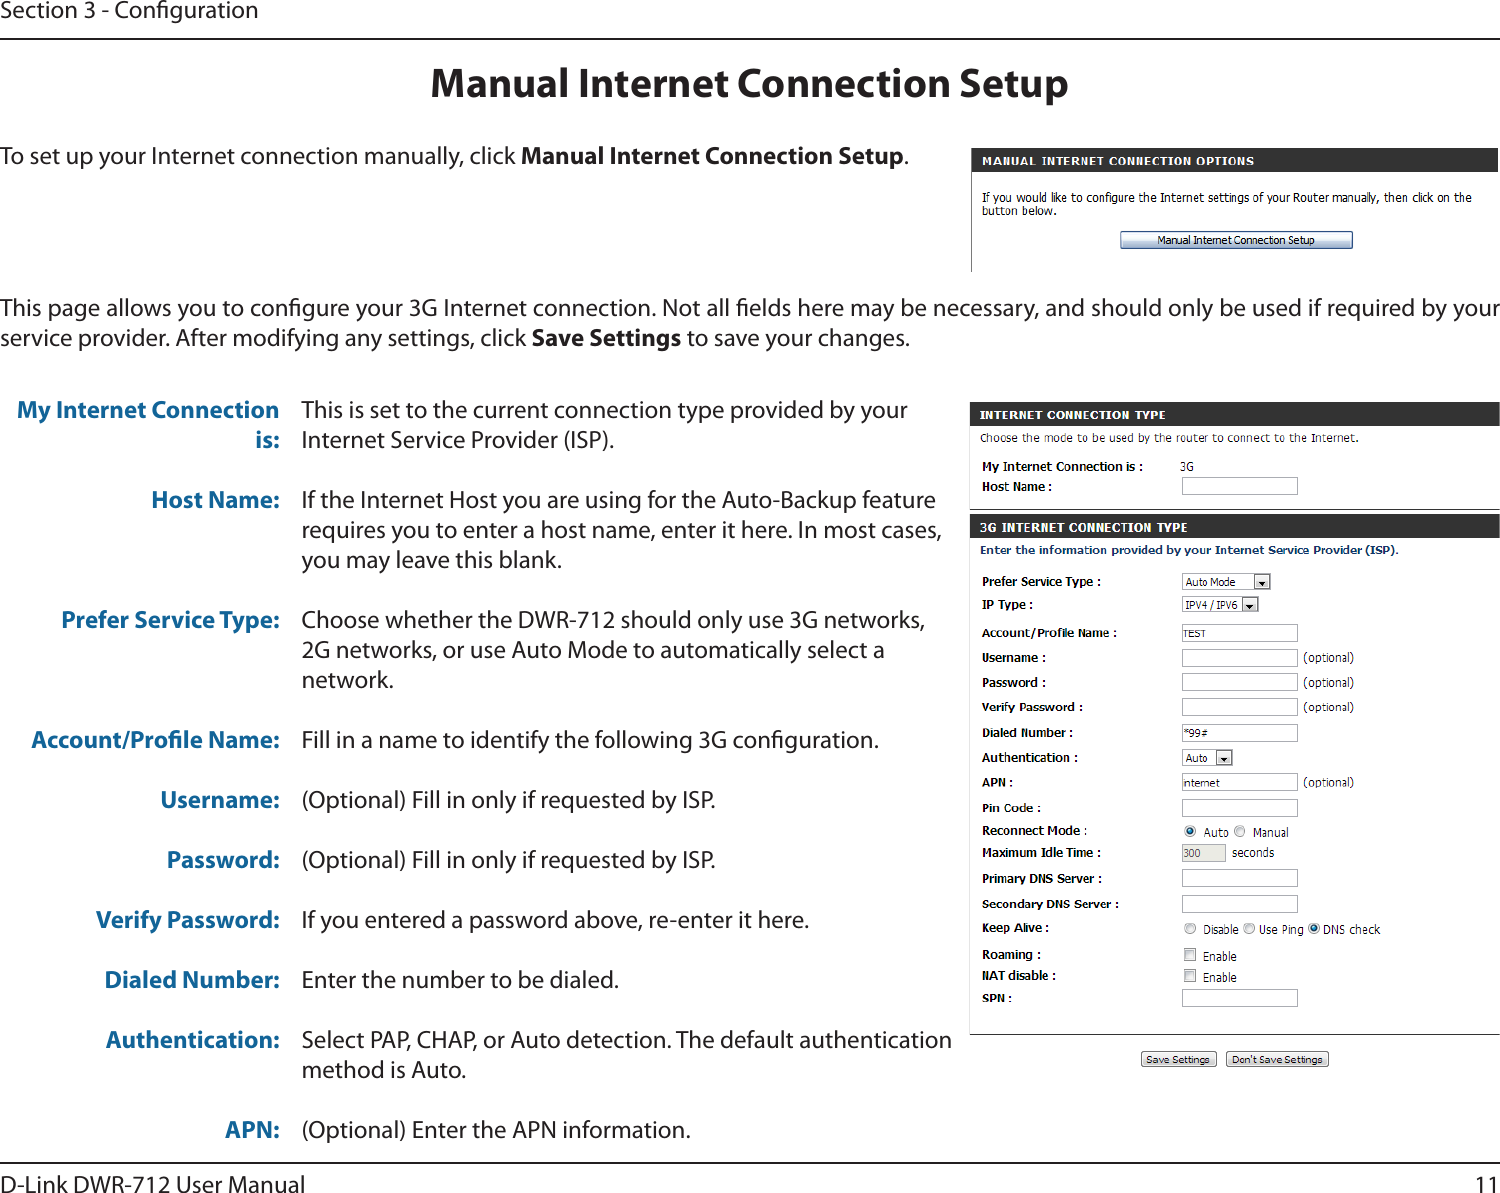 11D-Link DWR-712 User ManualSection 3 - CongurationThis is set to the current connection type provided by yourInternet Service Provider (ISP).If the Internet Host you are using for the Auto-Backup feature requires you to enter a host name, enter it here. In most cases, you may leave this blank.Choose whether the DWR-712 should only use 3G networks, 2G networks, or use Auto Mode to automatically select a network.Fill in a name to identify the following 3G conguration. (Optional) Fill in only if requested by ISP.(Optional) Fill in only if requested by ISP.If you entered a password above, re-enter it here.Enter the number to be dialed.Select PAP, CHAP, or Auto detection. The default authentication method is Auto. (Optional) Enter the APN information.My Internet Connection is:Host Name:Prefer Service Type:Account/Prole Name: Username:Password:Verify Password:Dialed Number:Authentication:APN:This page allows you to congure your 3G Internet connection. Not all elds here may be necessary, and should only be used if required by your service provider. After modifying any settings, click Save Settings to save your changes.Manual Internet Connection SetupTo set up your Internet connection manually, click Manual Internet Connection Setup.